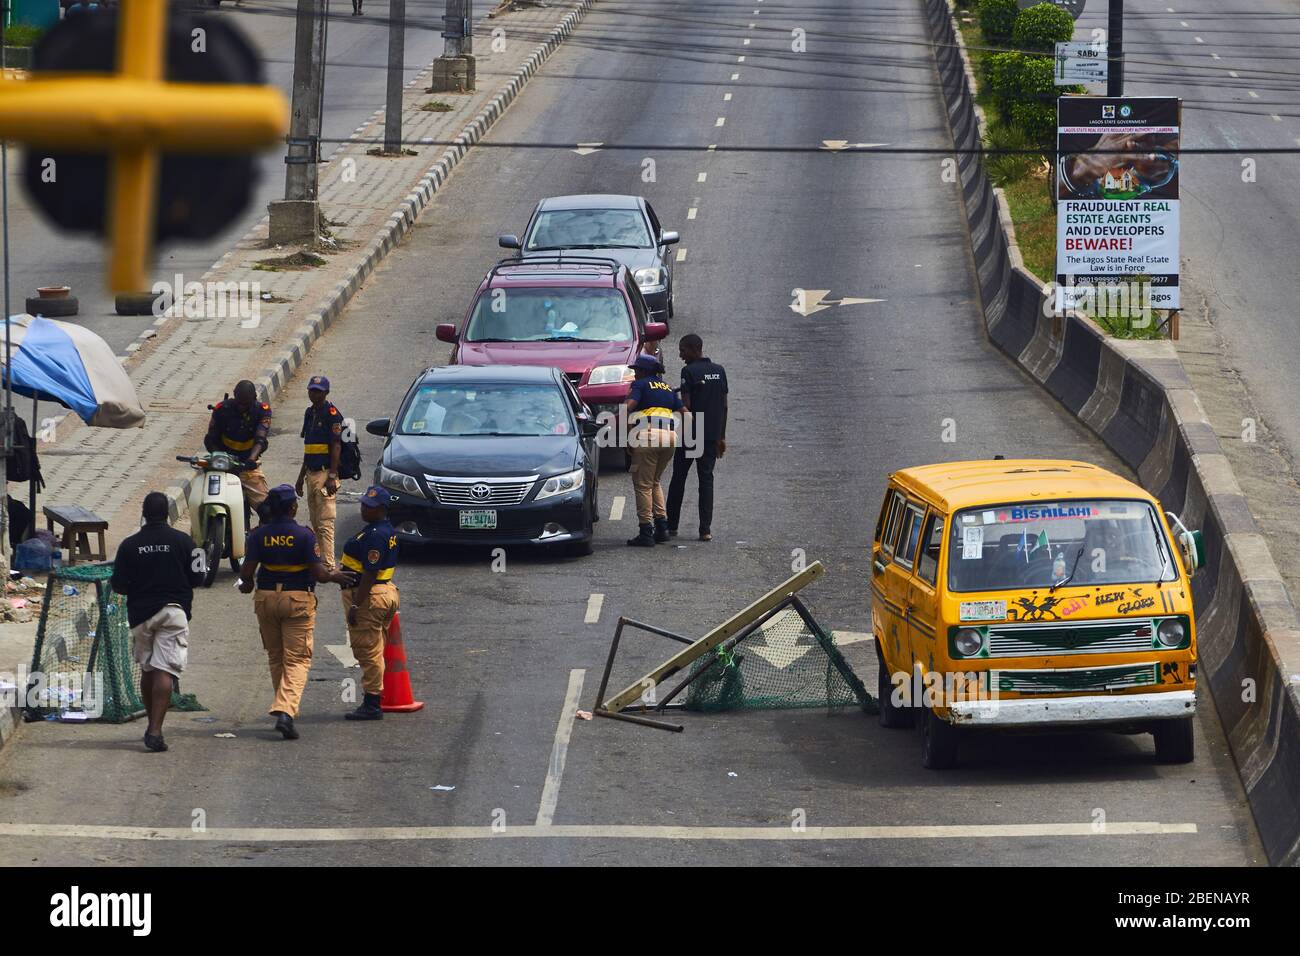 Police and other security agencies at a roadblock at Sabo bus stop, Herbert Macauley Way, Lagos, Nigeria to enforce Covid-19 lockdown restrictions. Stock Photo